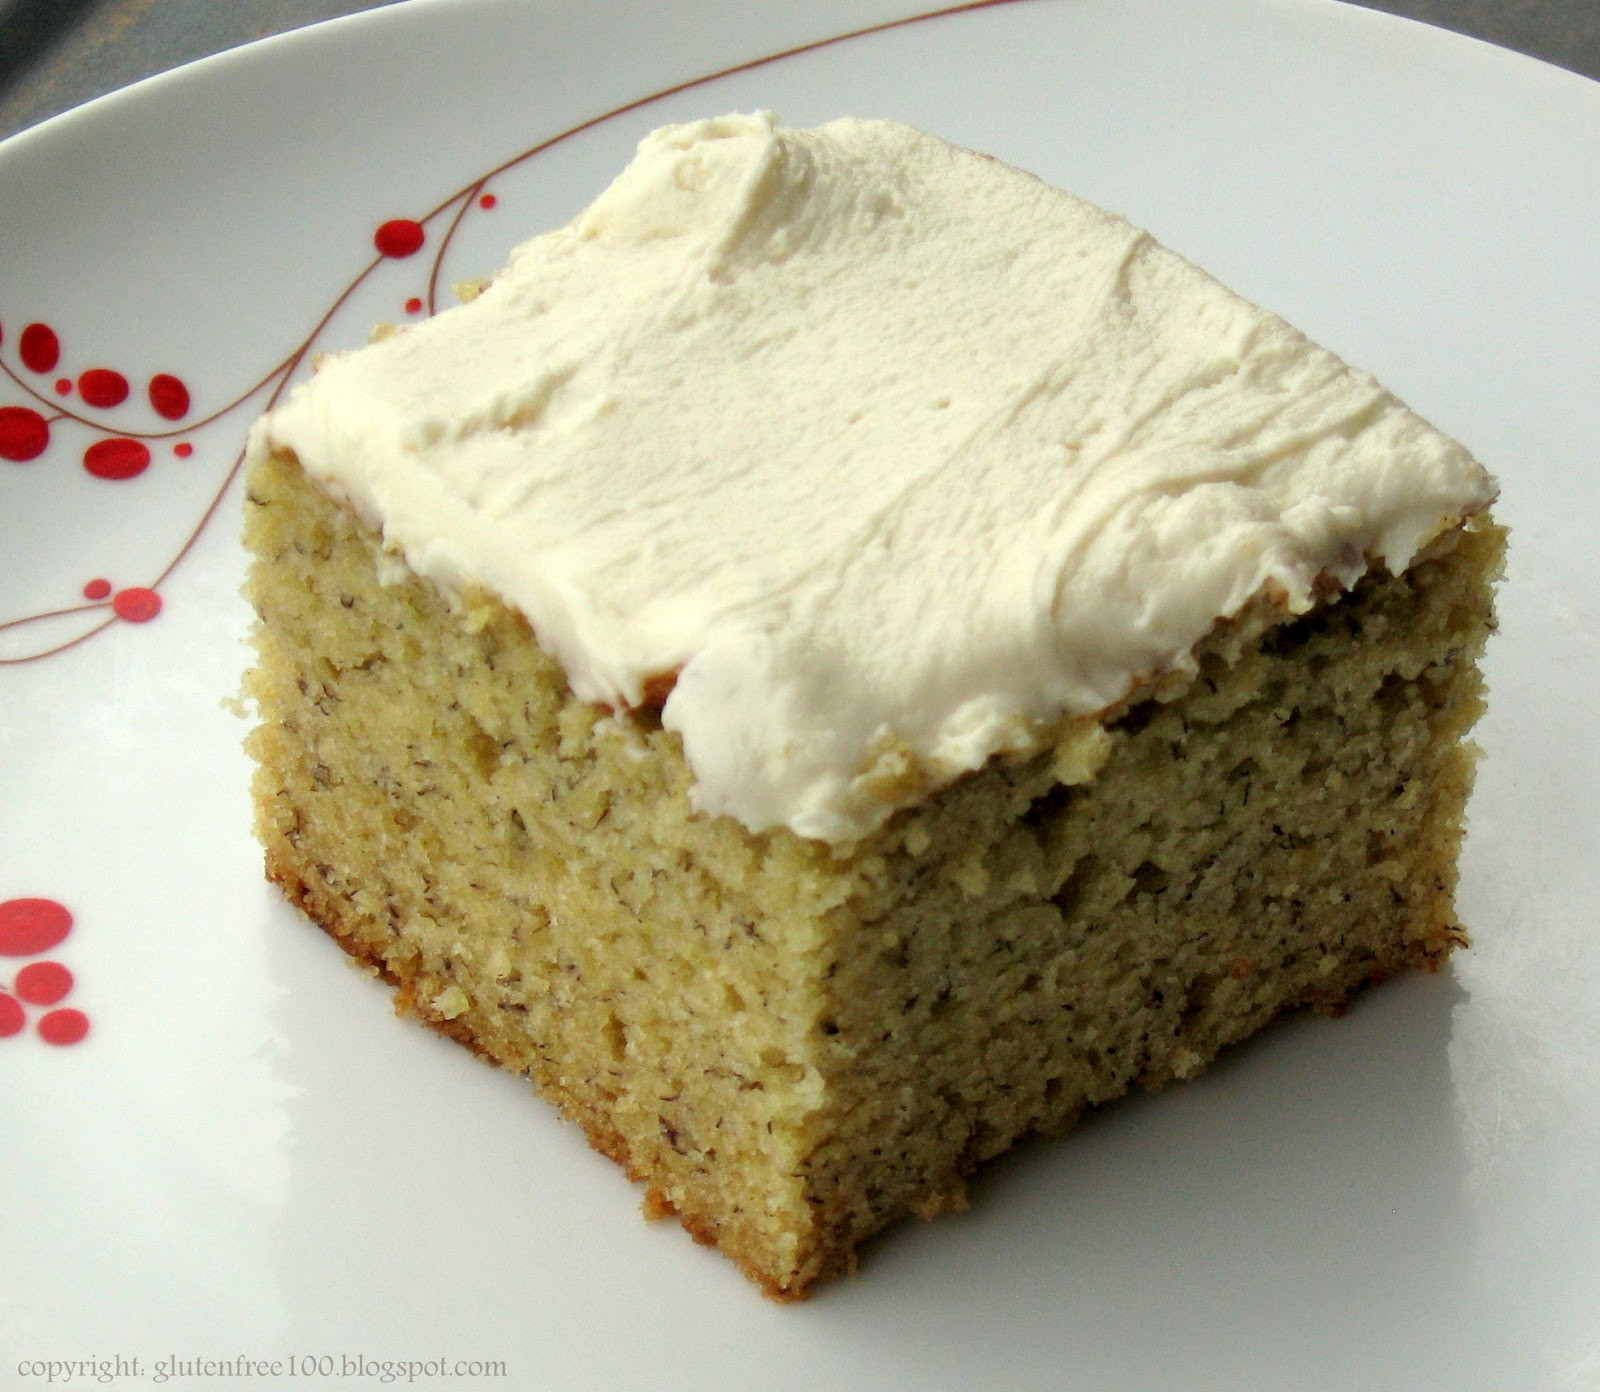 Gluten Free Banana Cake
 Gluten Free Banana Cake with Browned Butter Frosting Recipe